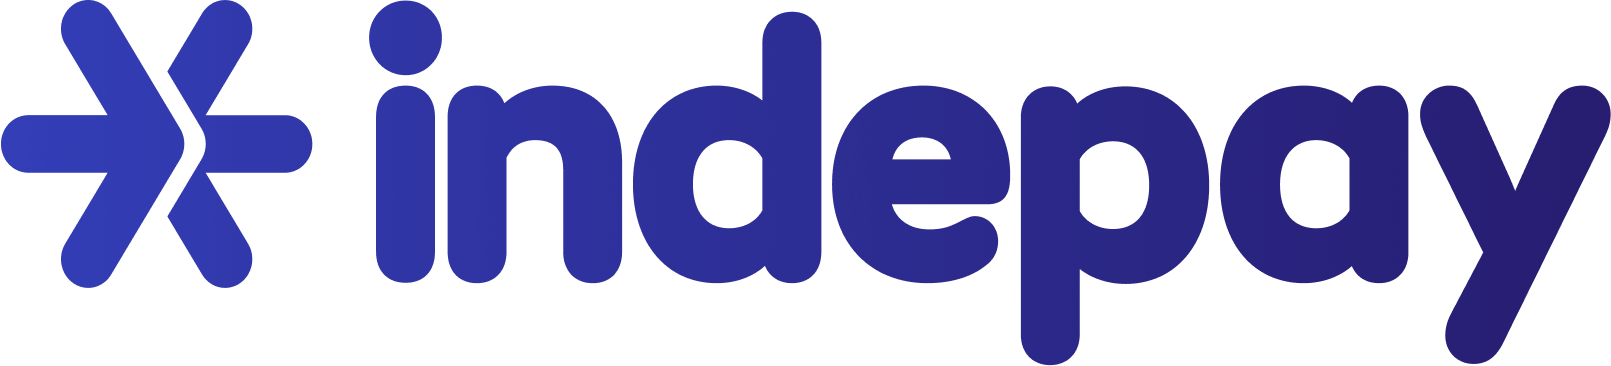 Indepay